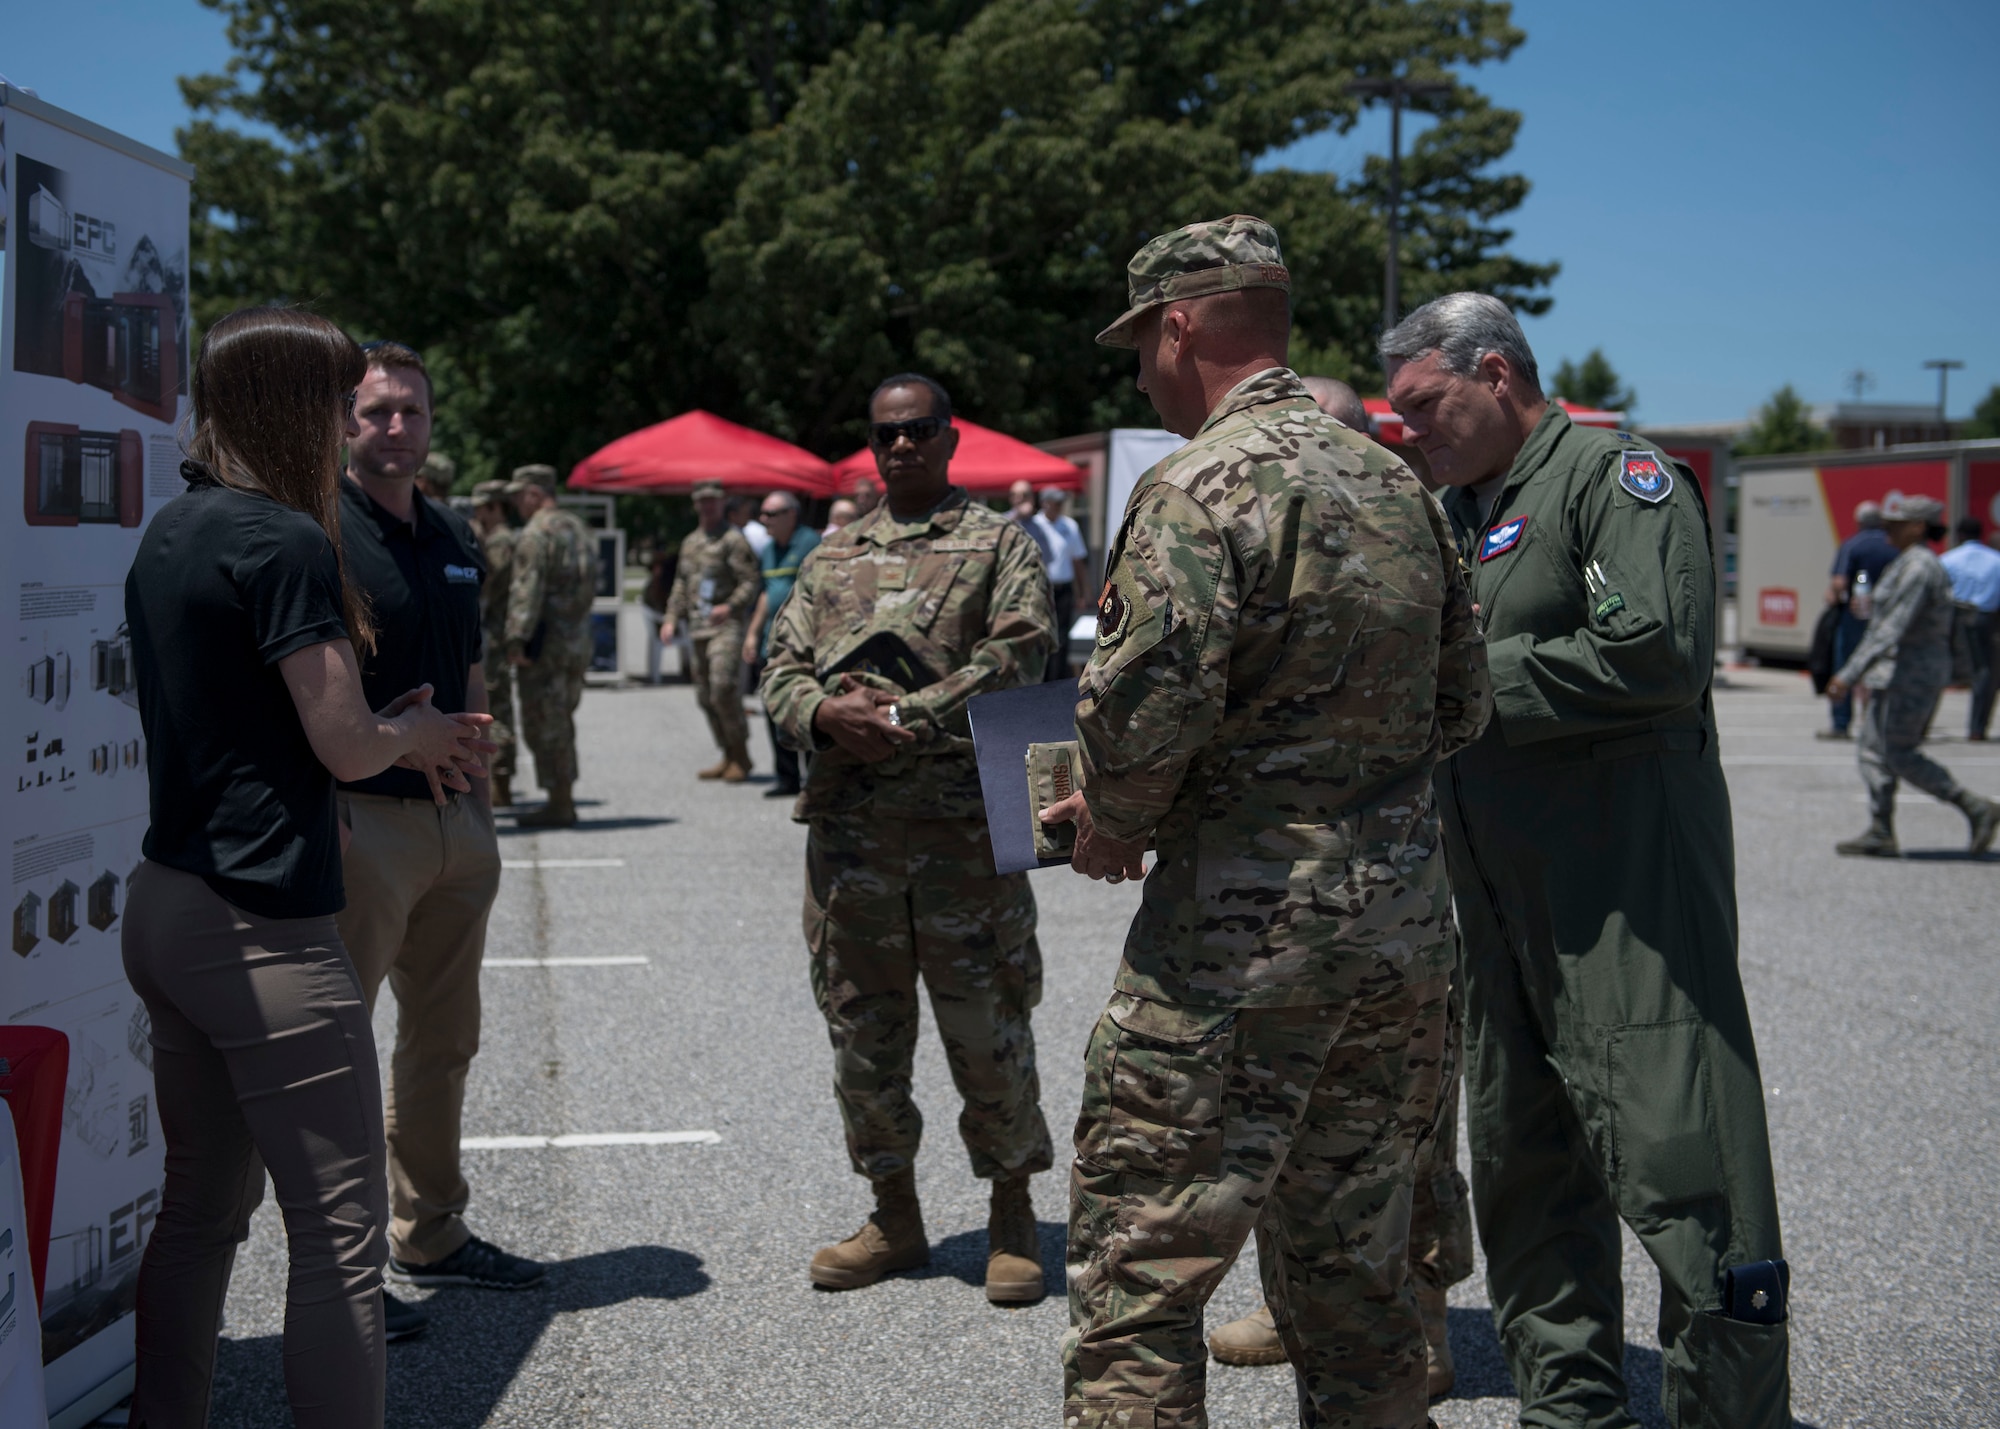 An Expeditionary Preventative Clinic Systems representative speaks to members from various U.S. Air Force major commands during the Manpower and Equipment Force Packaging Summit at Joint Base Langley-Eustis, Virginia, June 4, 2019.